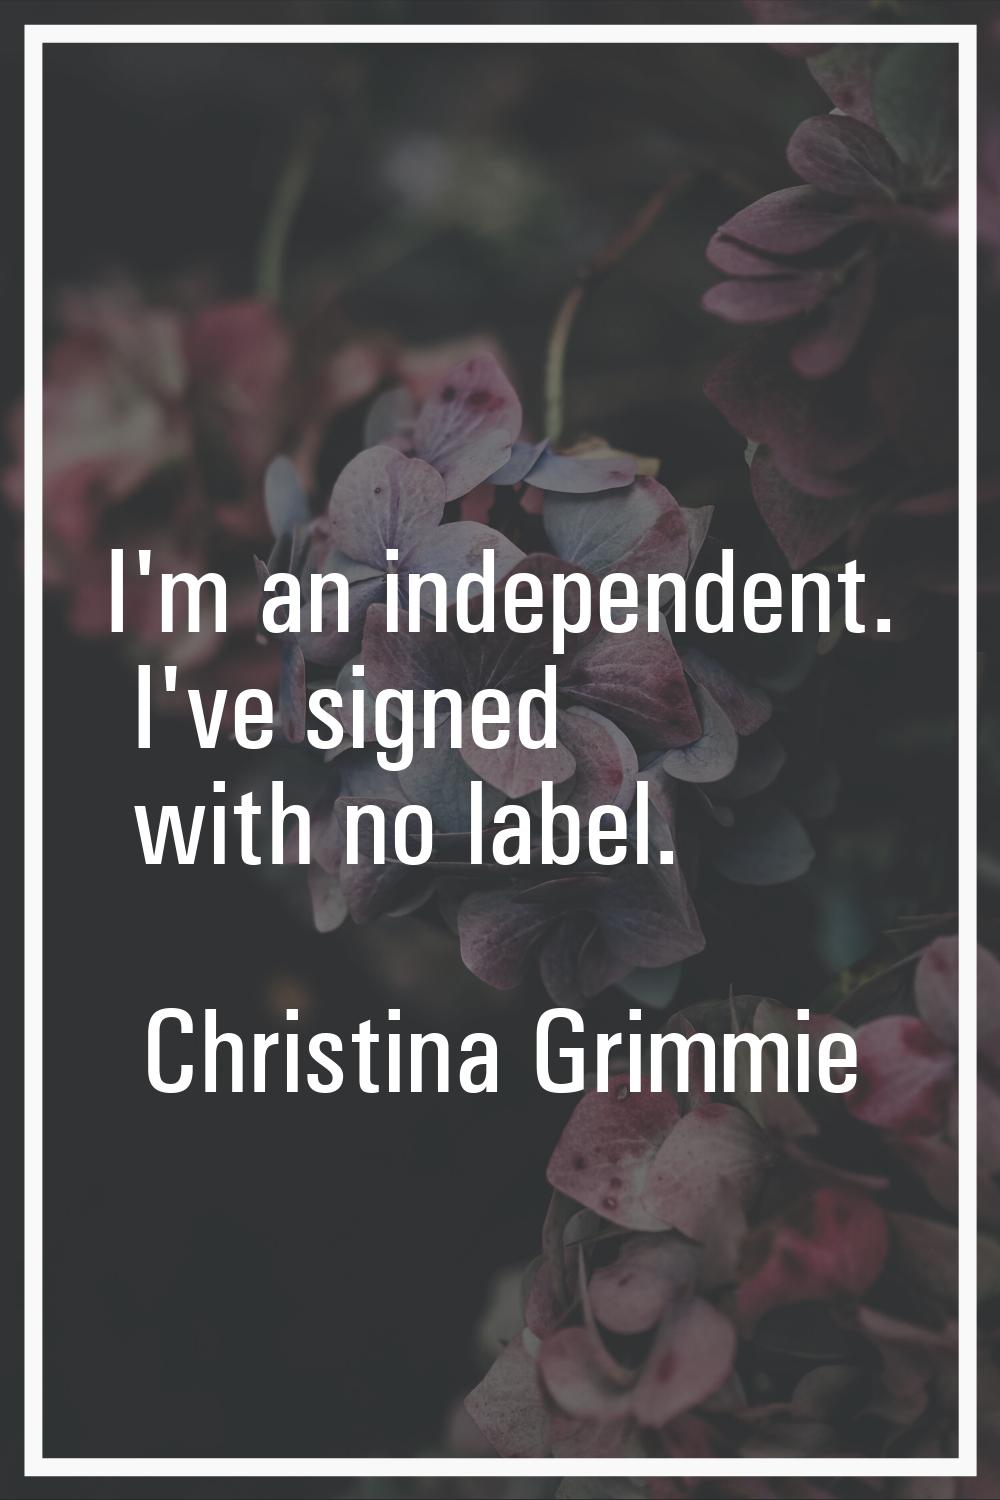 I'm an independent. I've signed with no label.